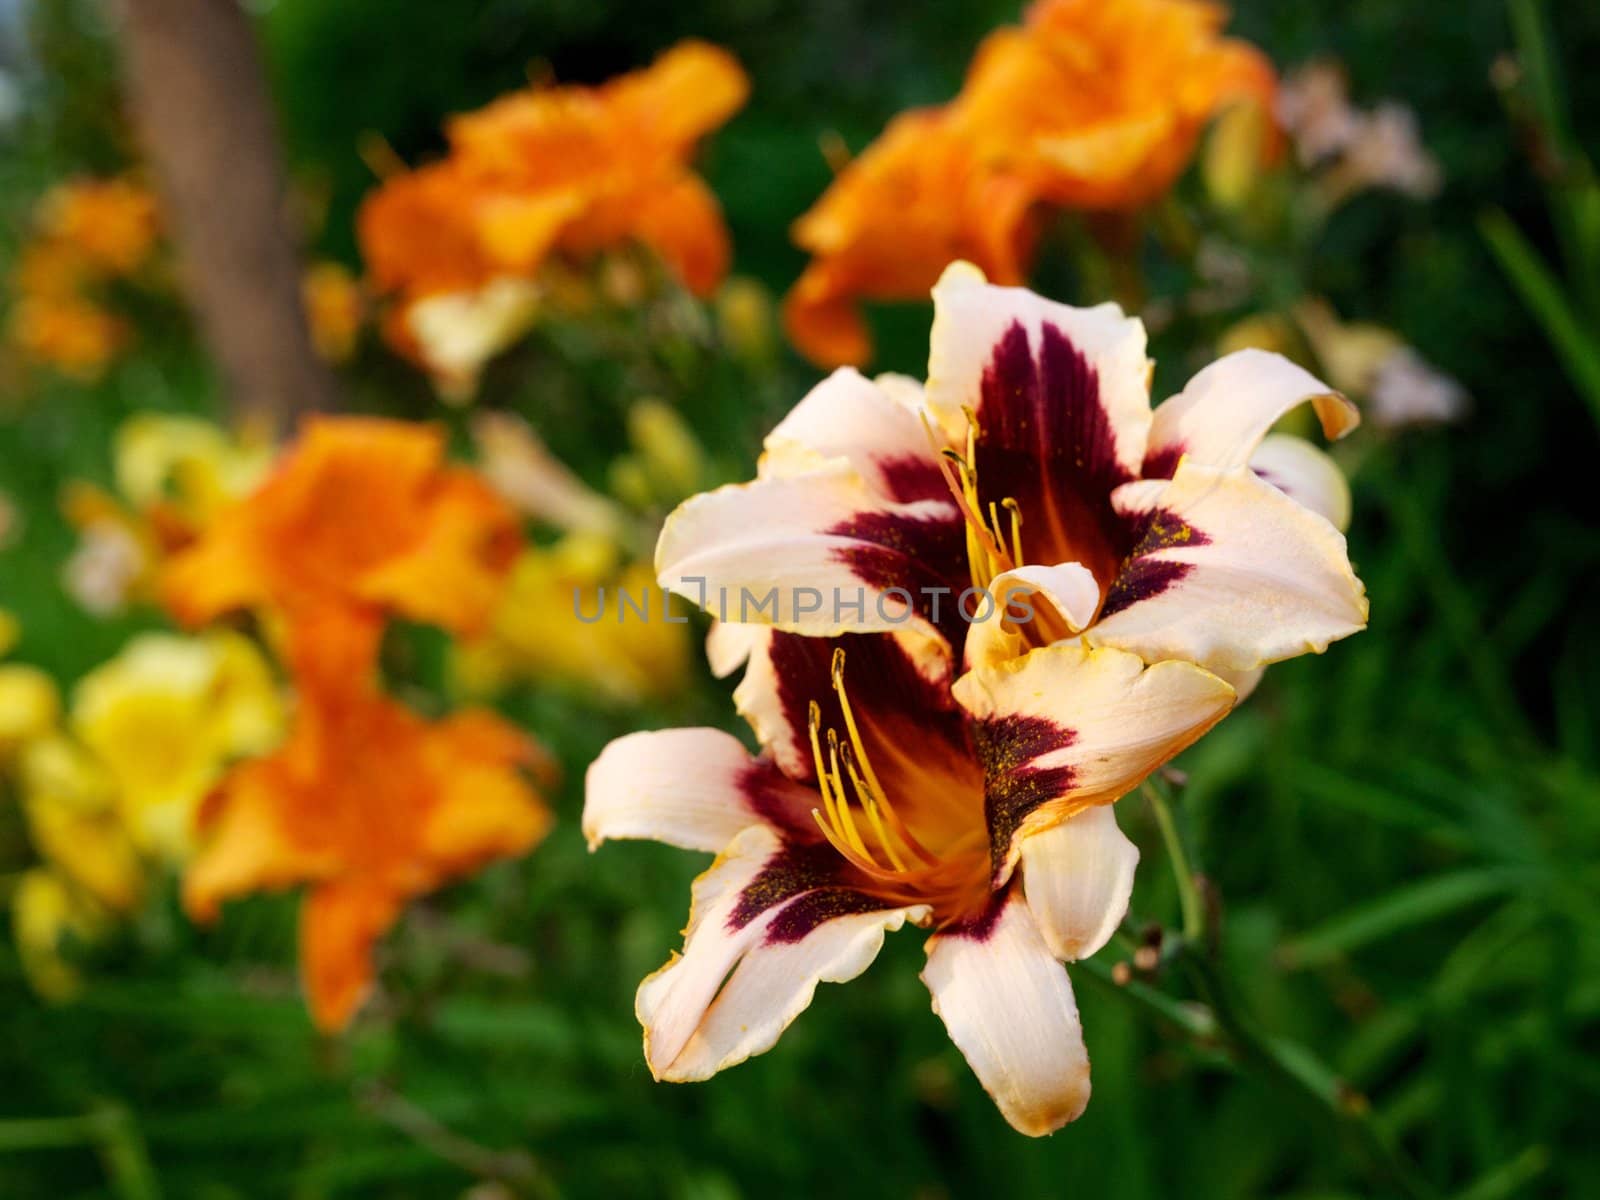 Day-lily flowers in a garden. Photo with blurred background.